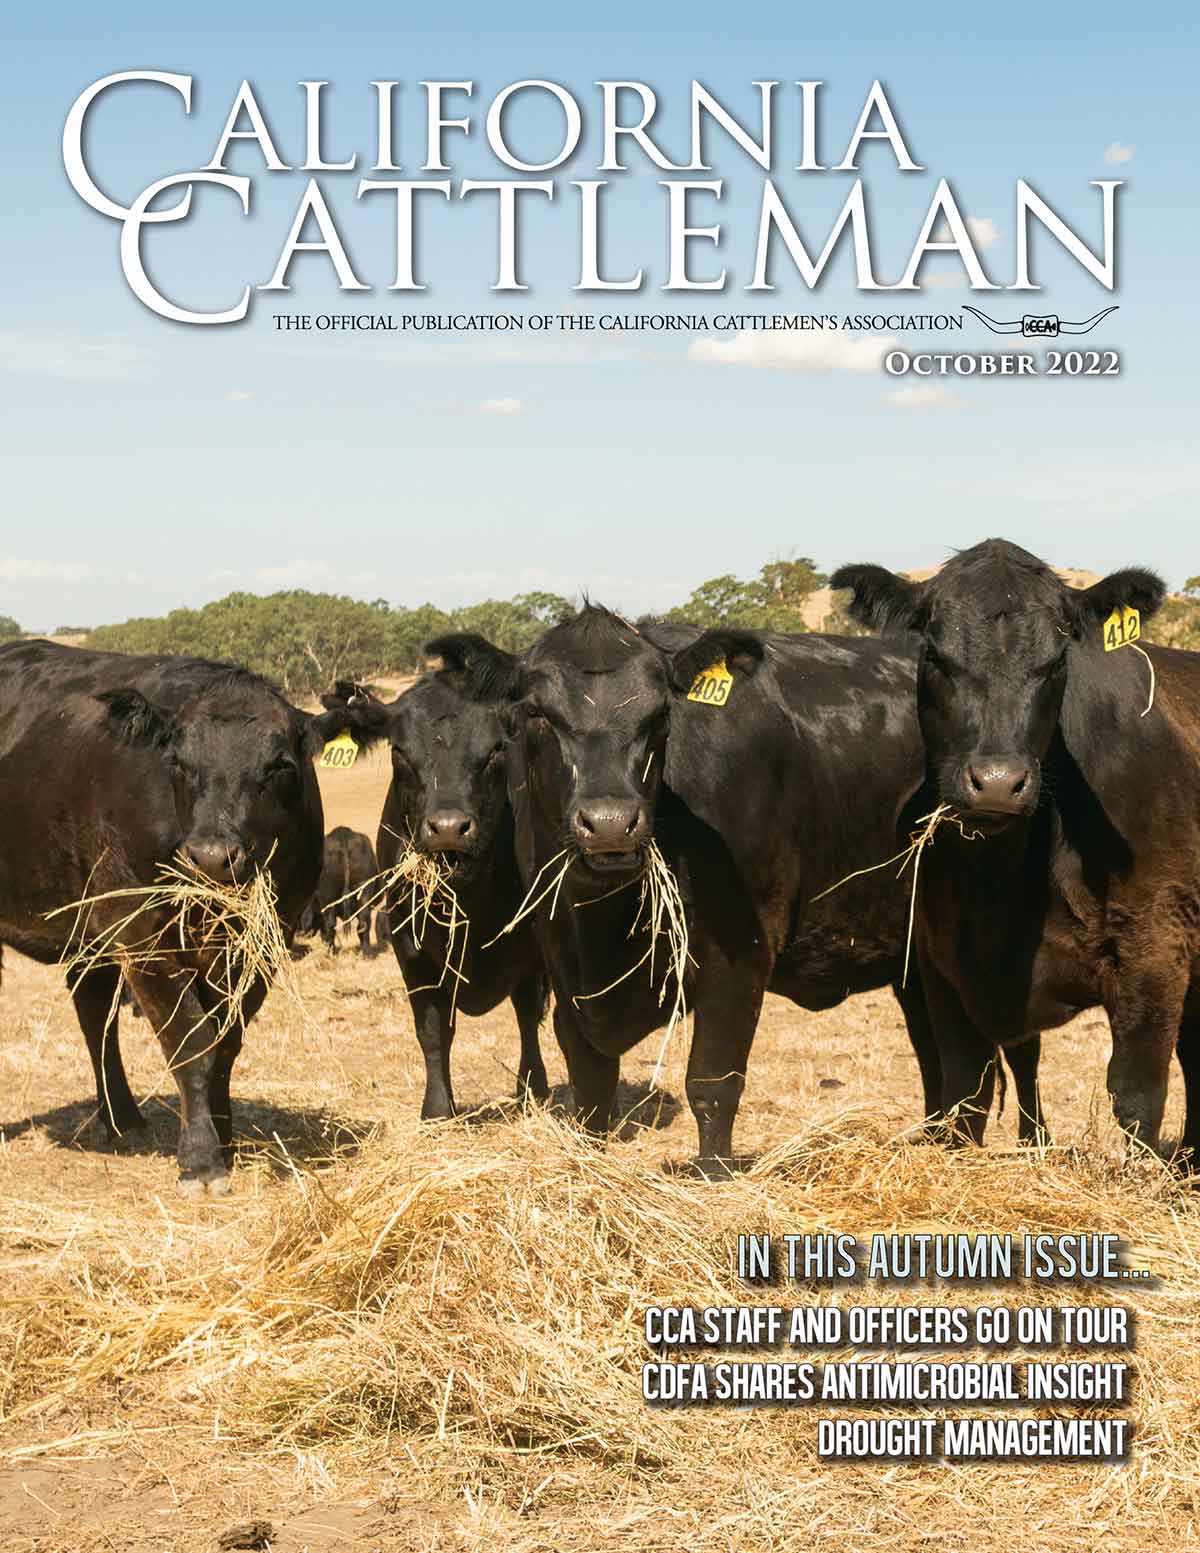 Cattle eating hay on cover of Oct. magazine